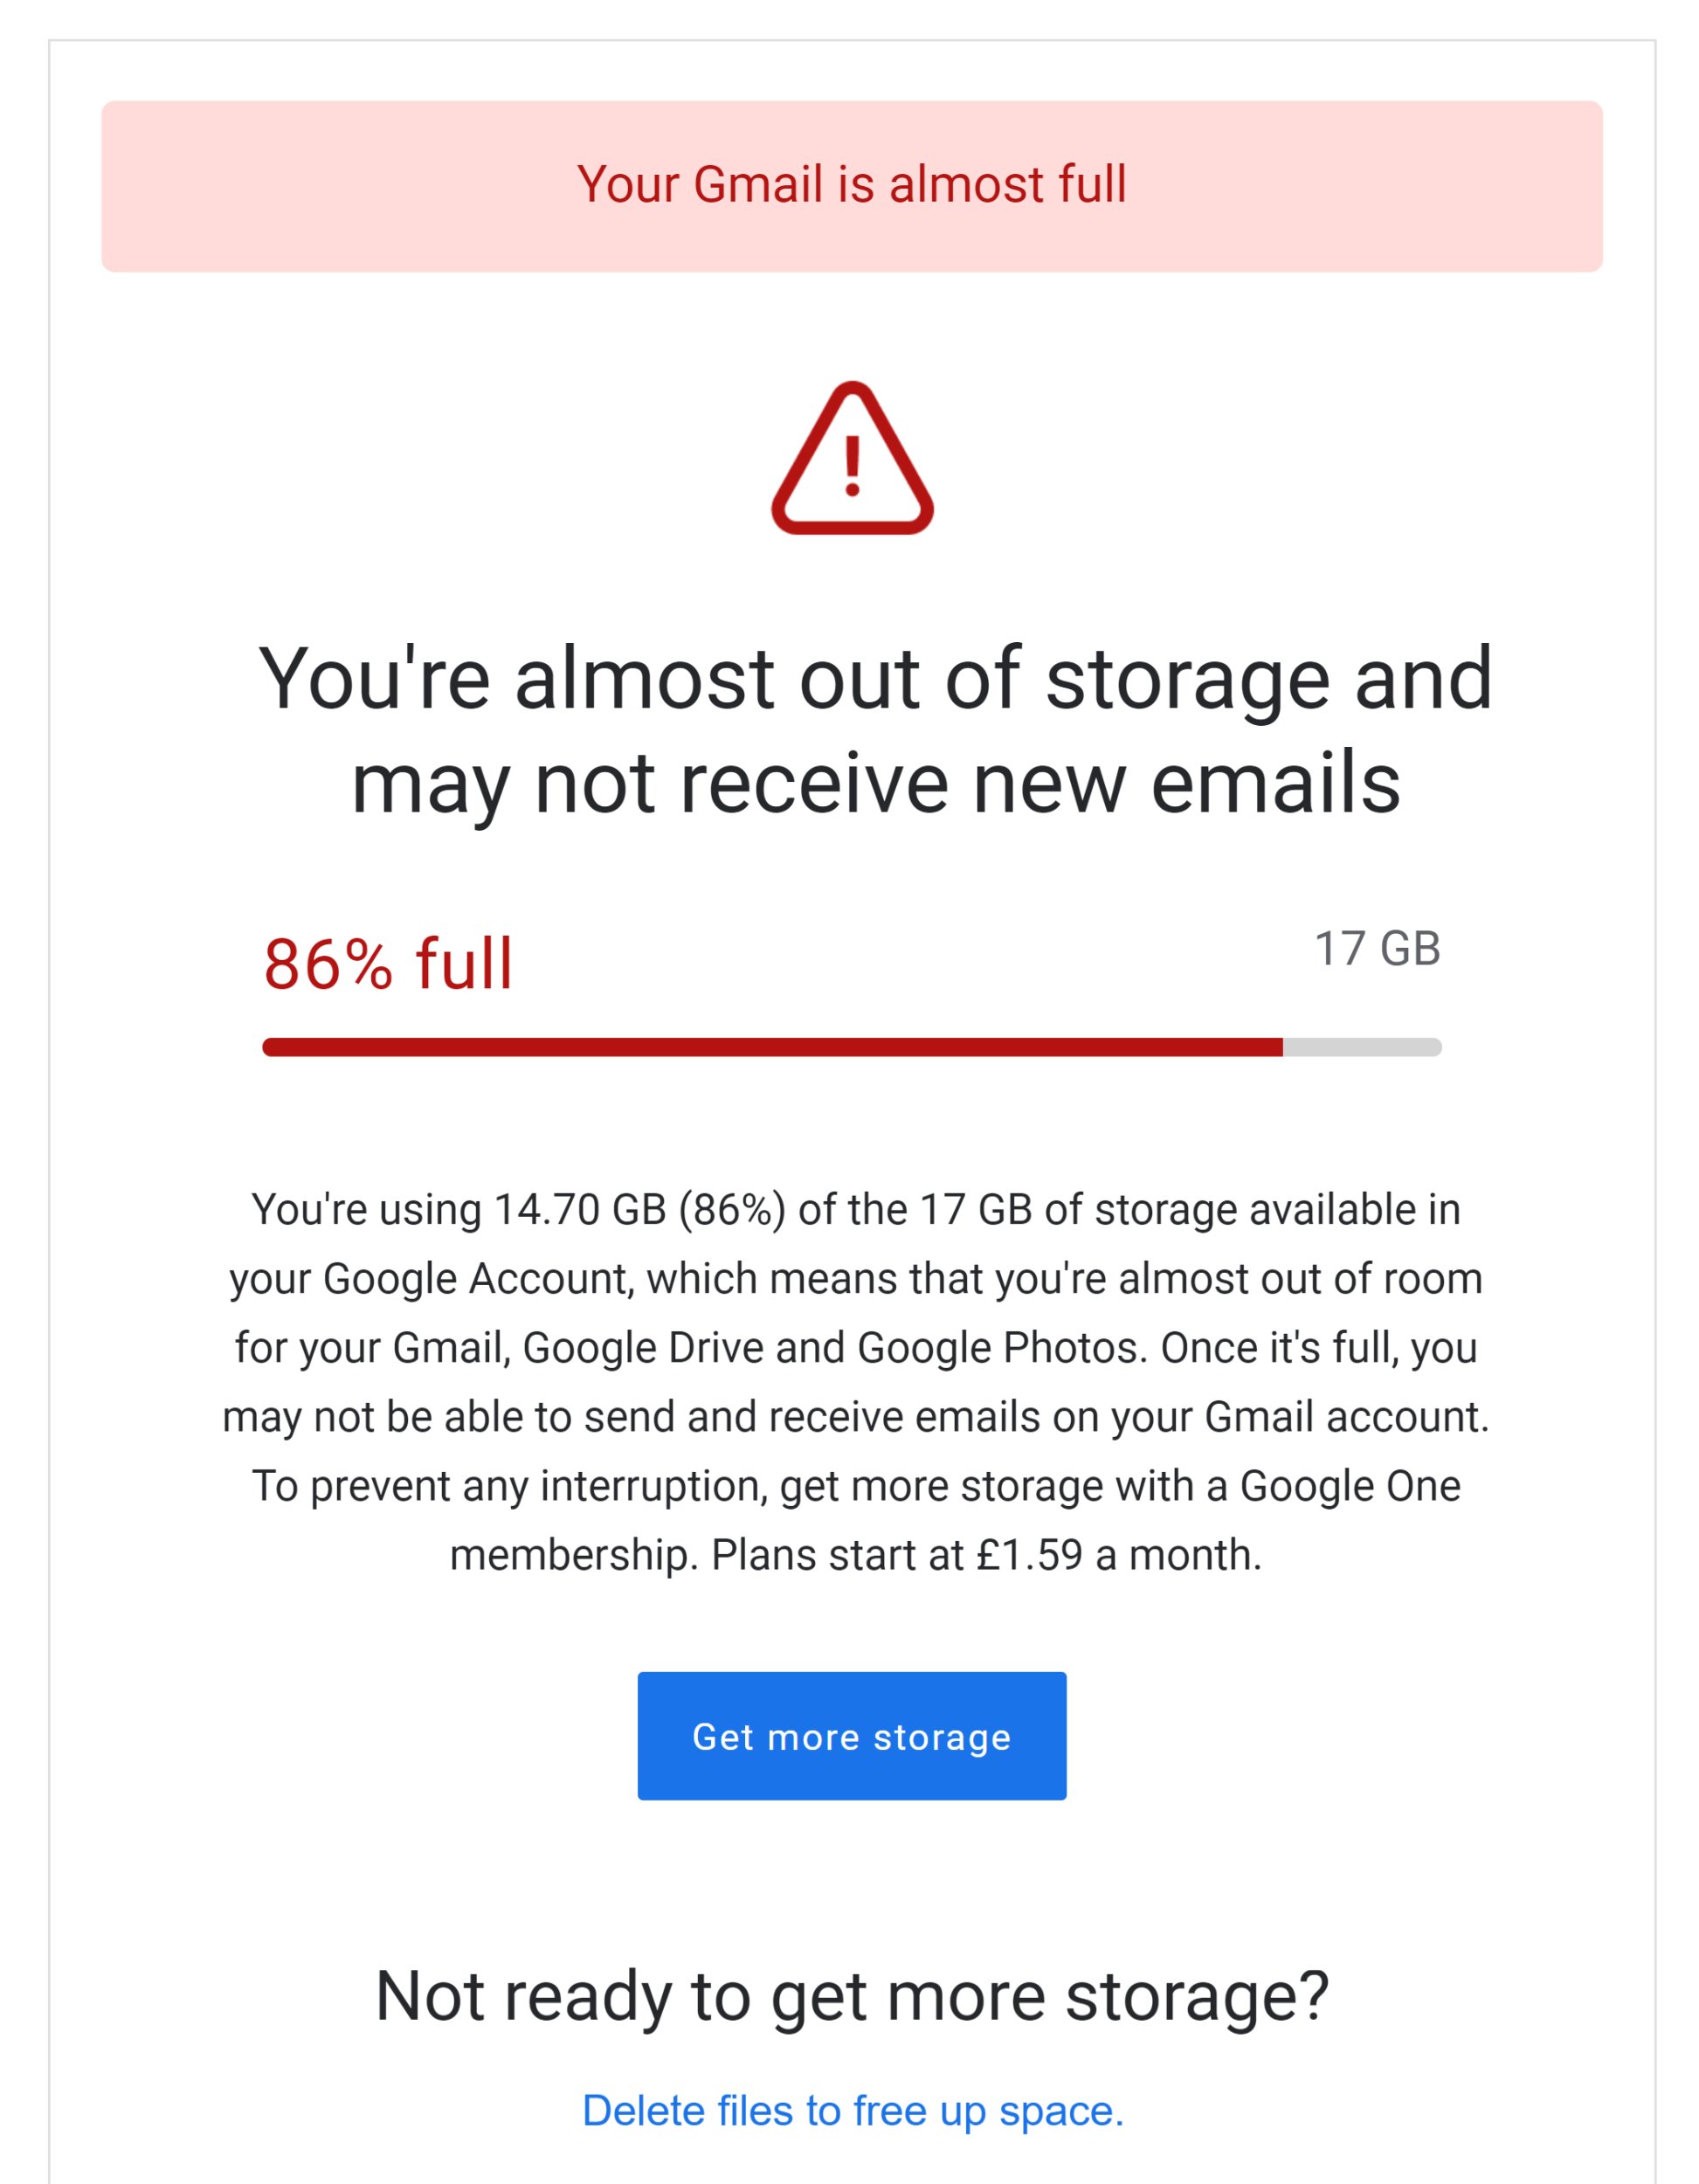 Your Gmail is Almost Full